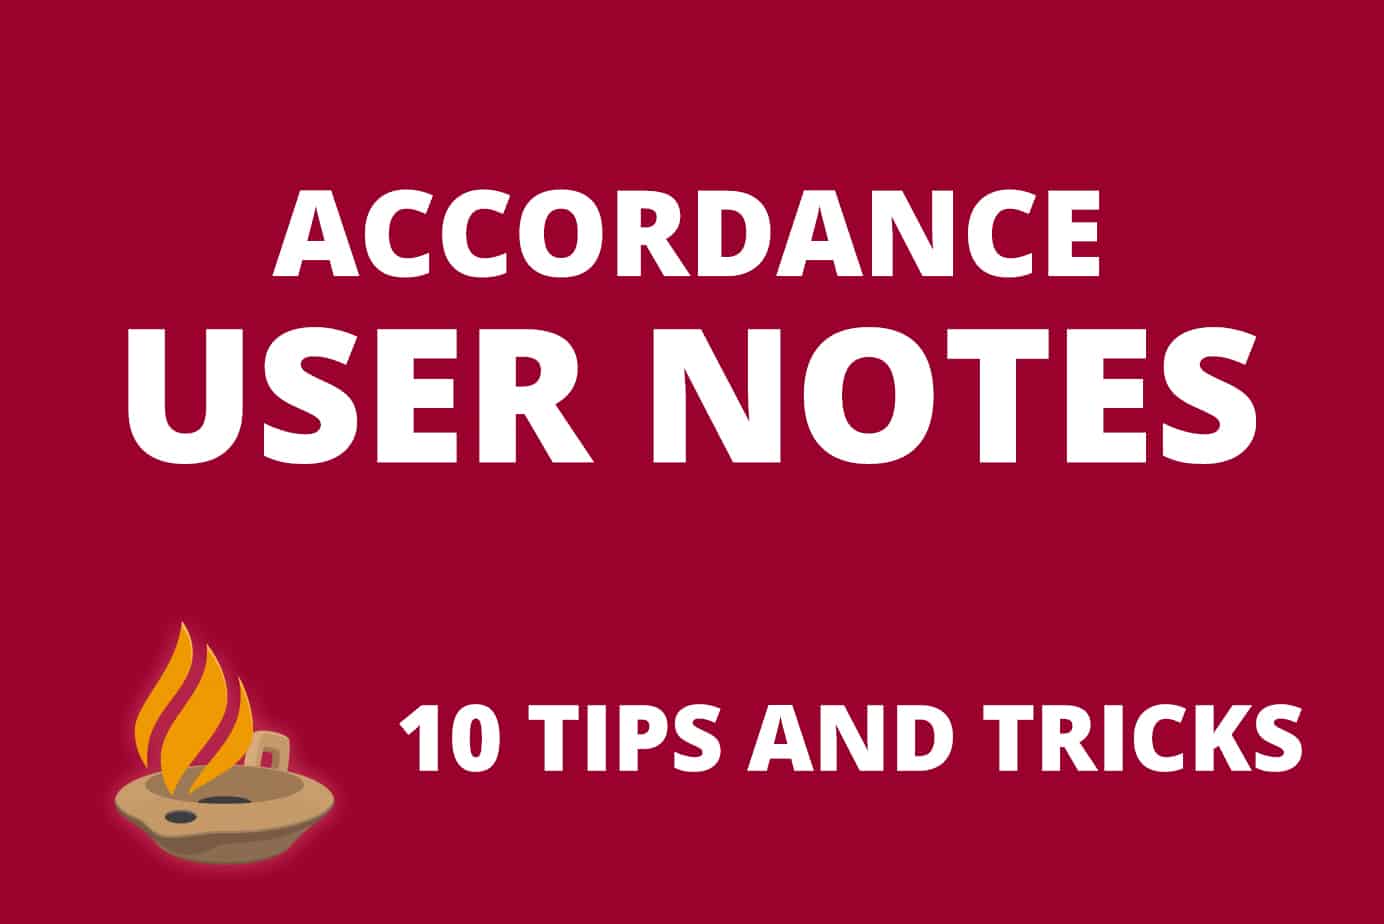 Tips to Get the Most Out of Accordance User Notes